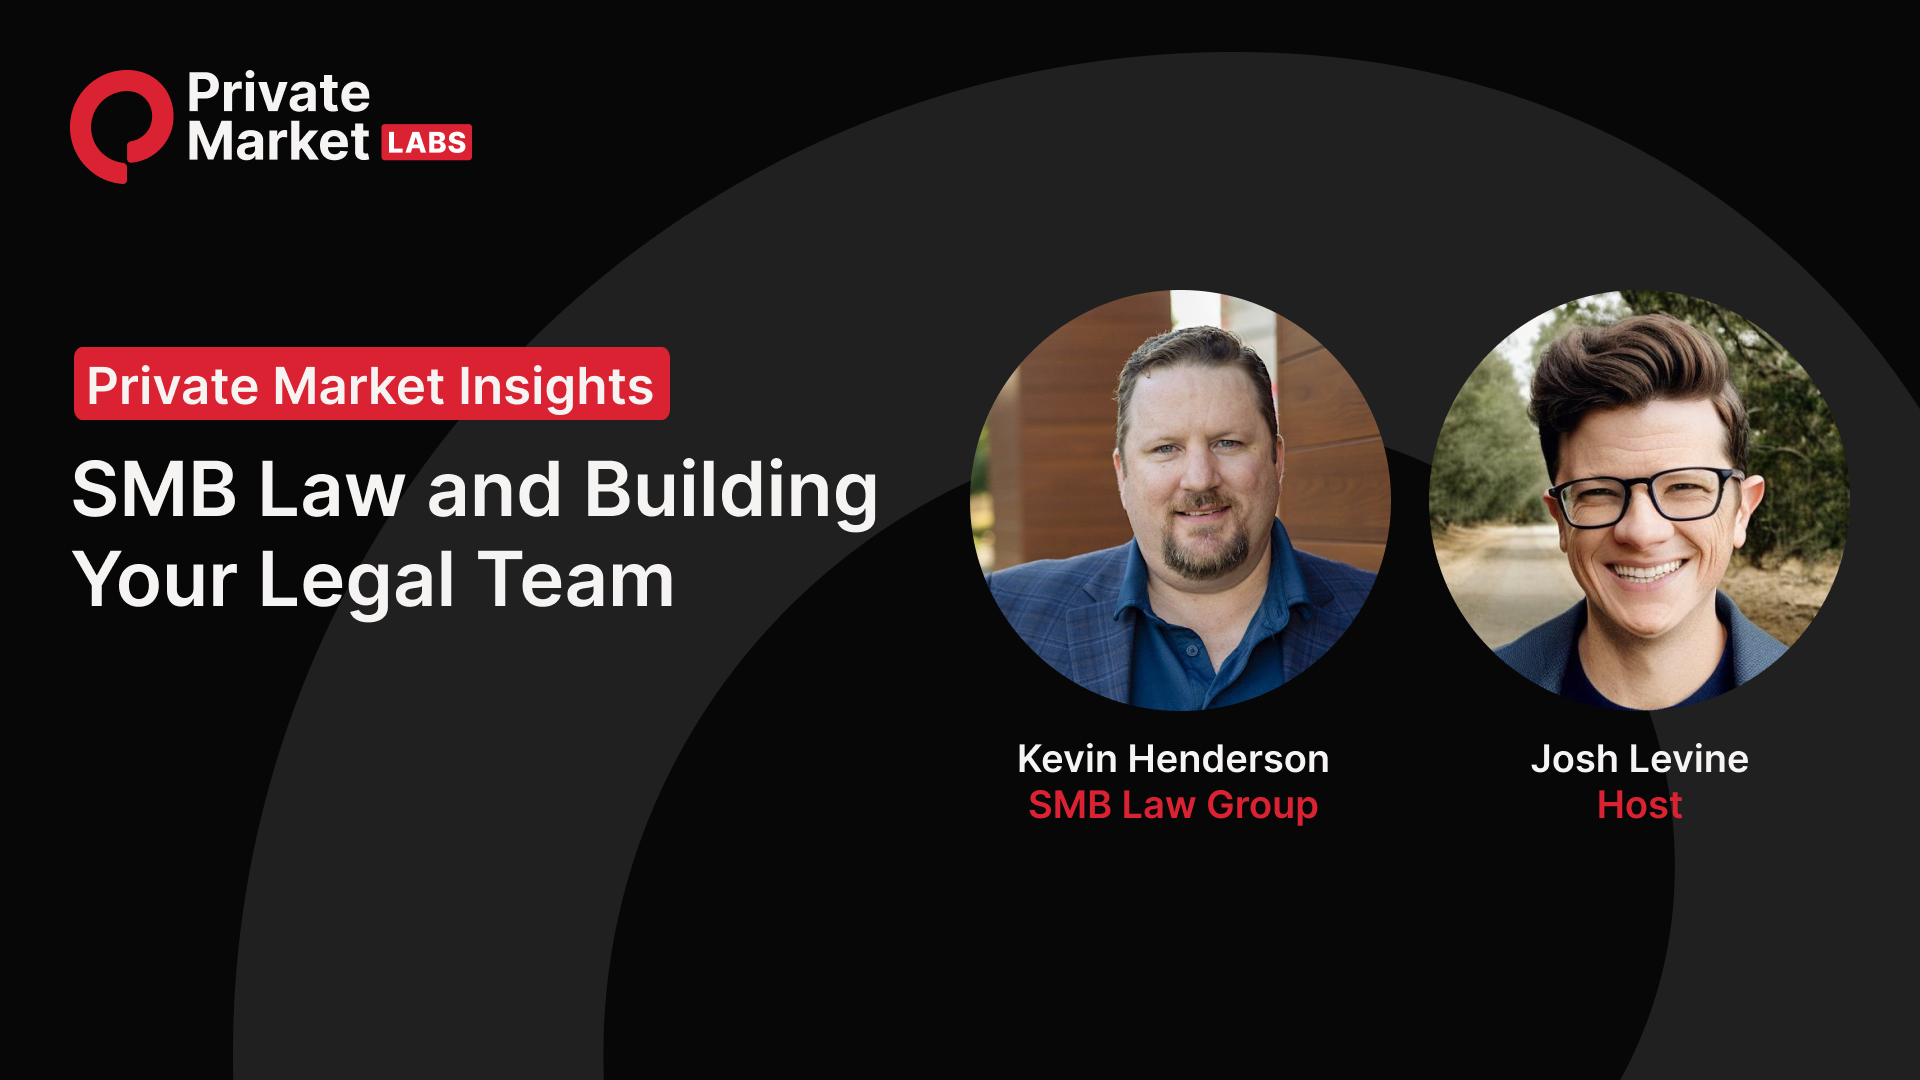 SMB Acquisition Legal Team Insights with Legal Expert Kevin Henderson